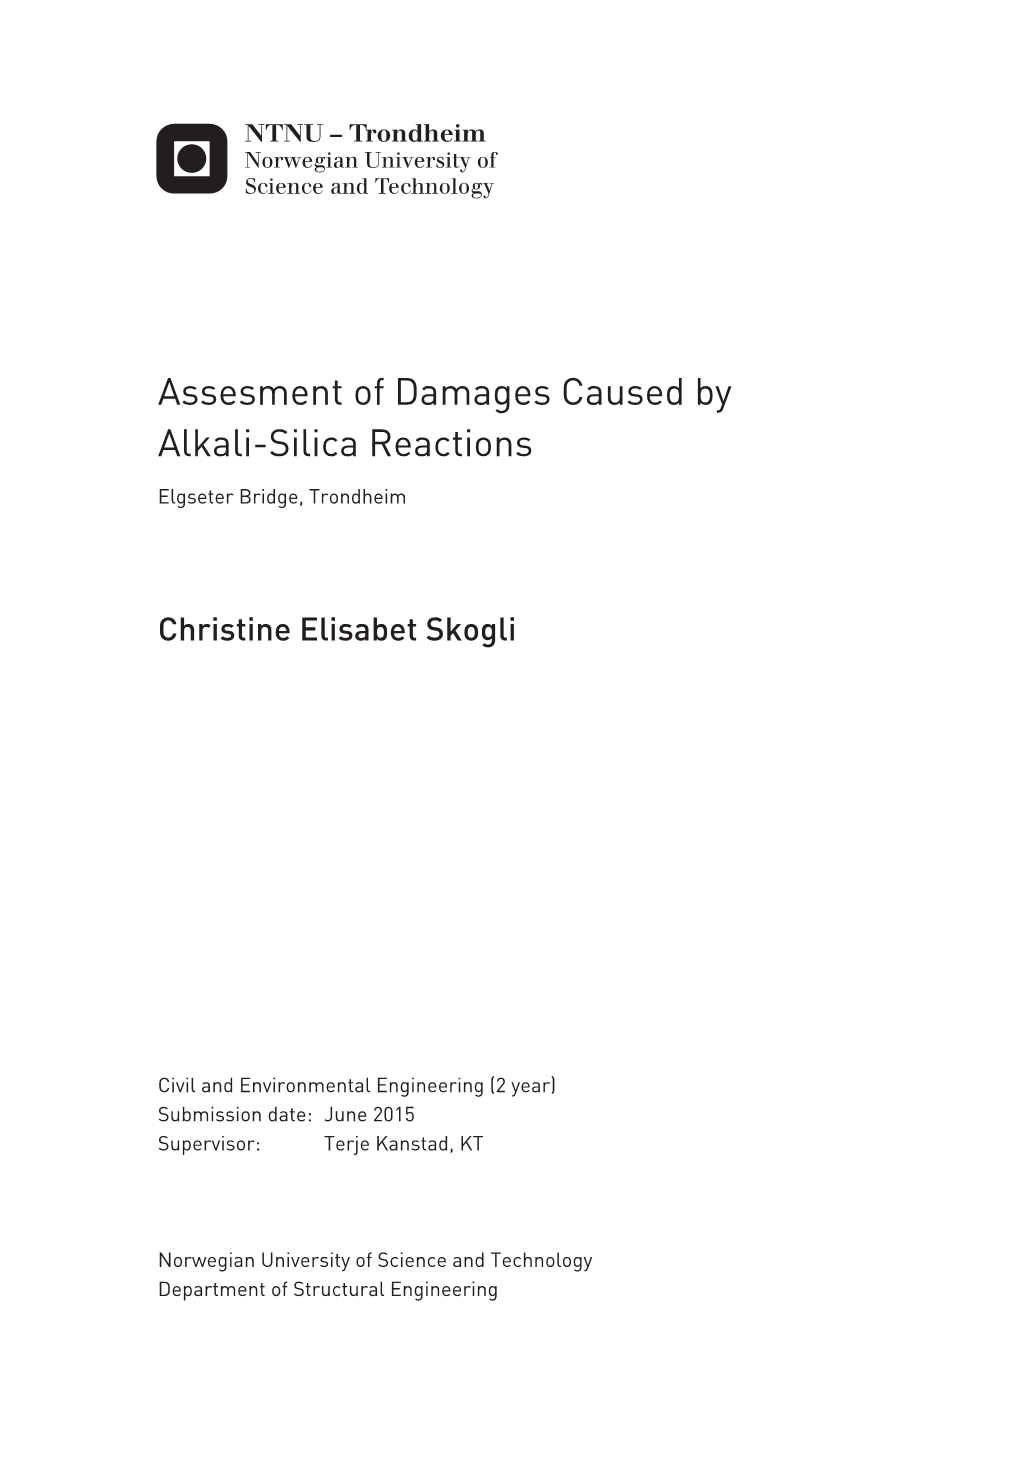 Assesment of Damages Caused by Alkali-Silica Reactions